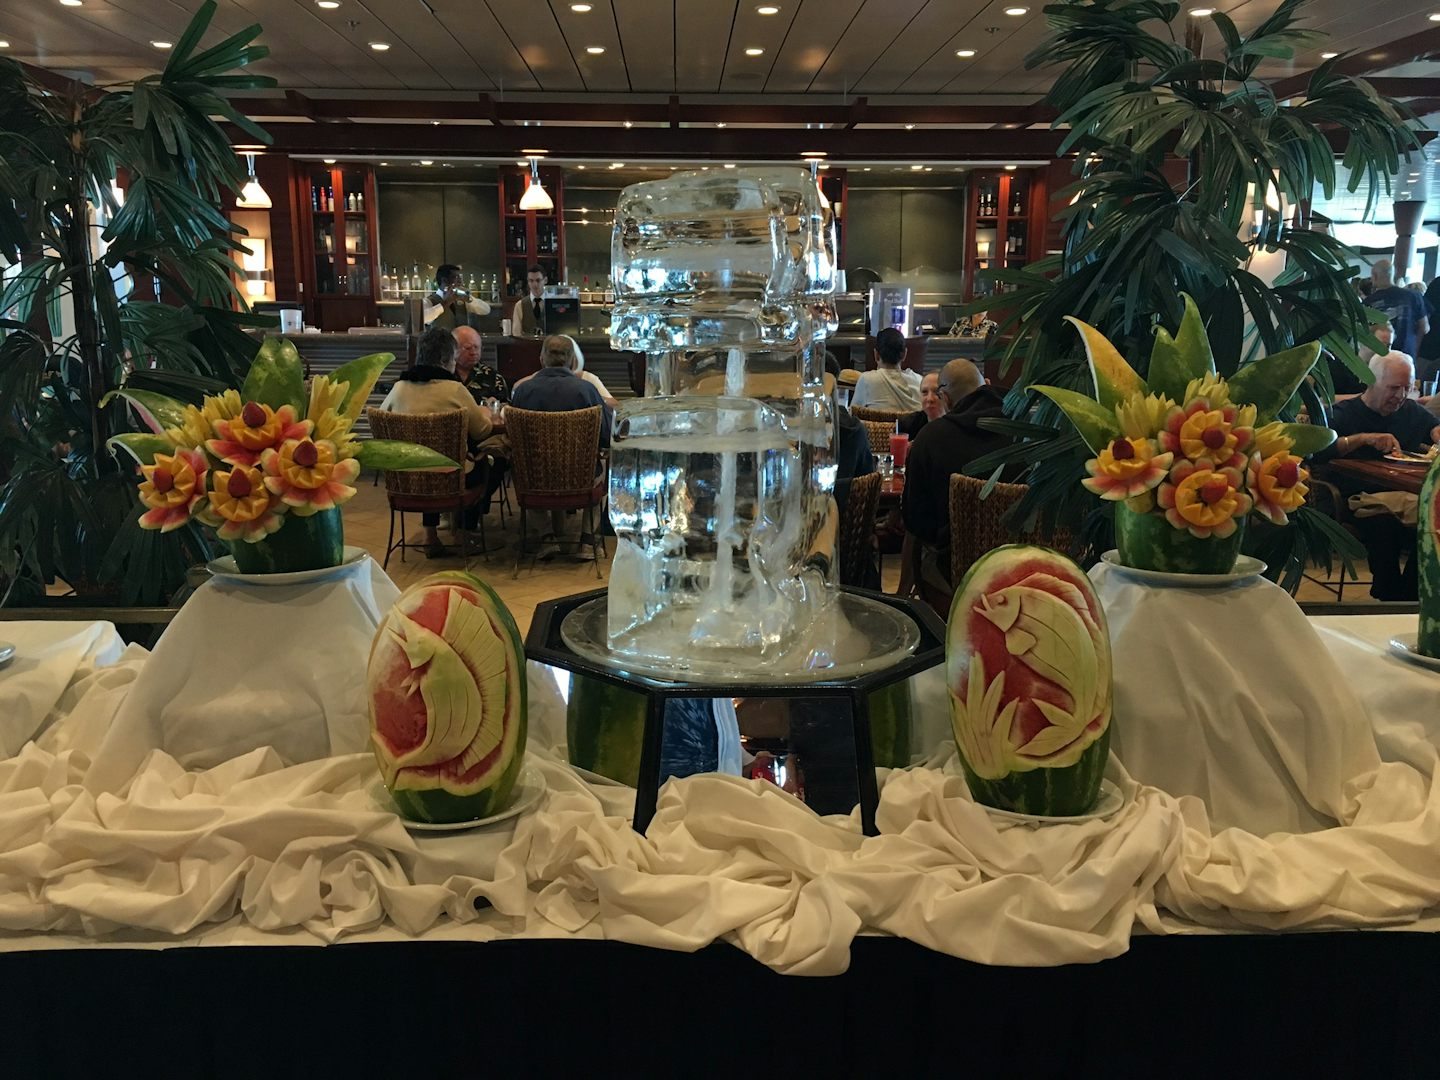 Carved watermelons and ice sculpture, leading into the Windjammer